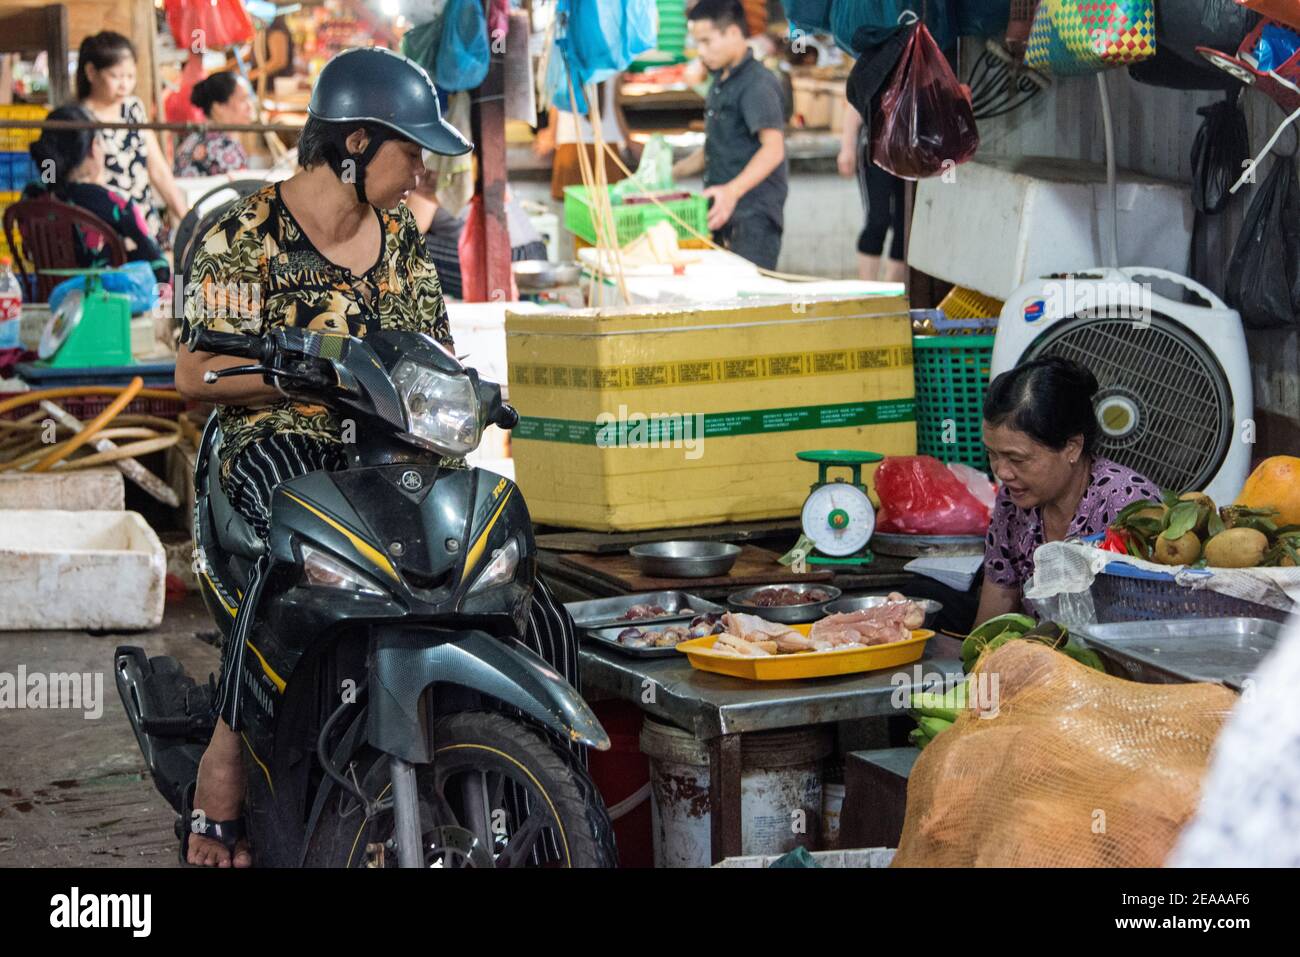 Weekly market, shopping with moped Stock Photo